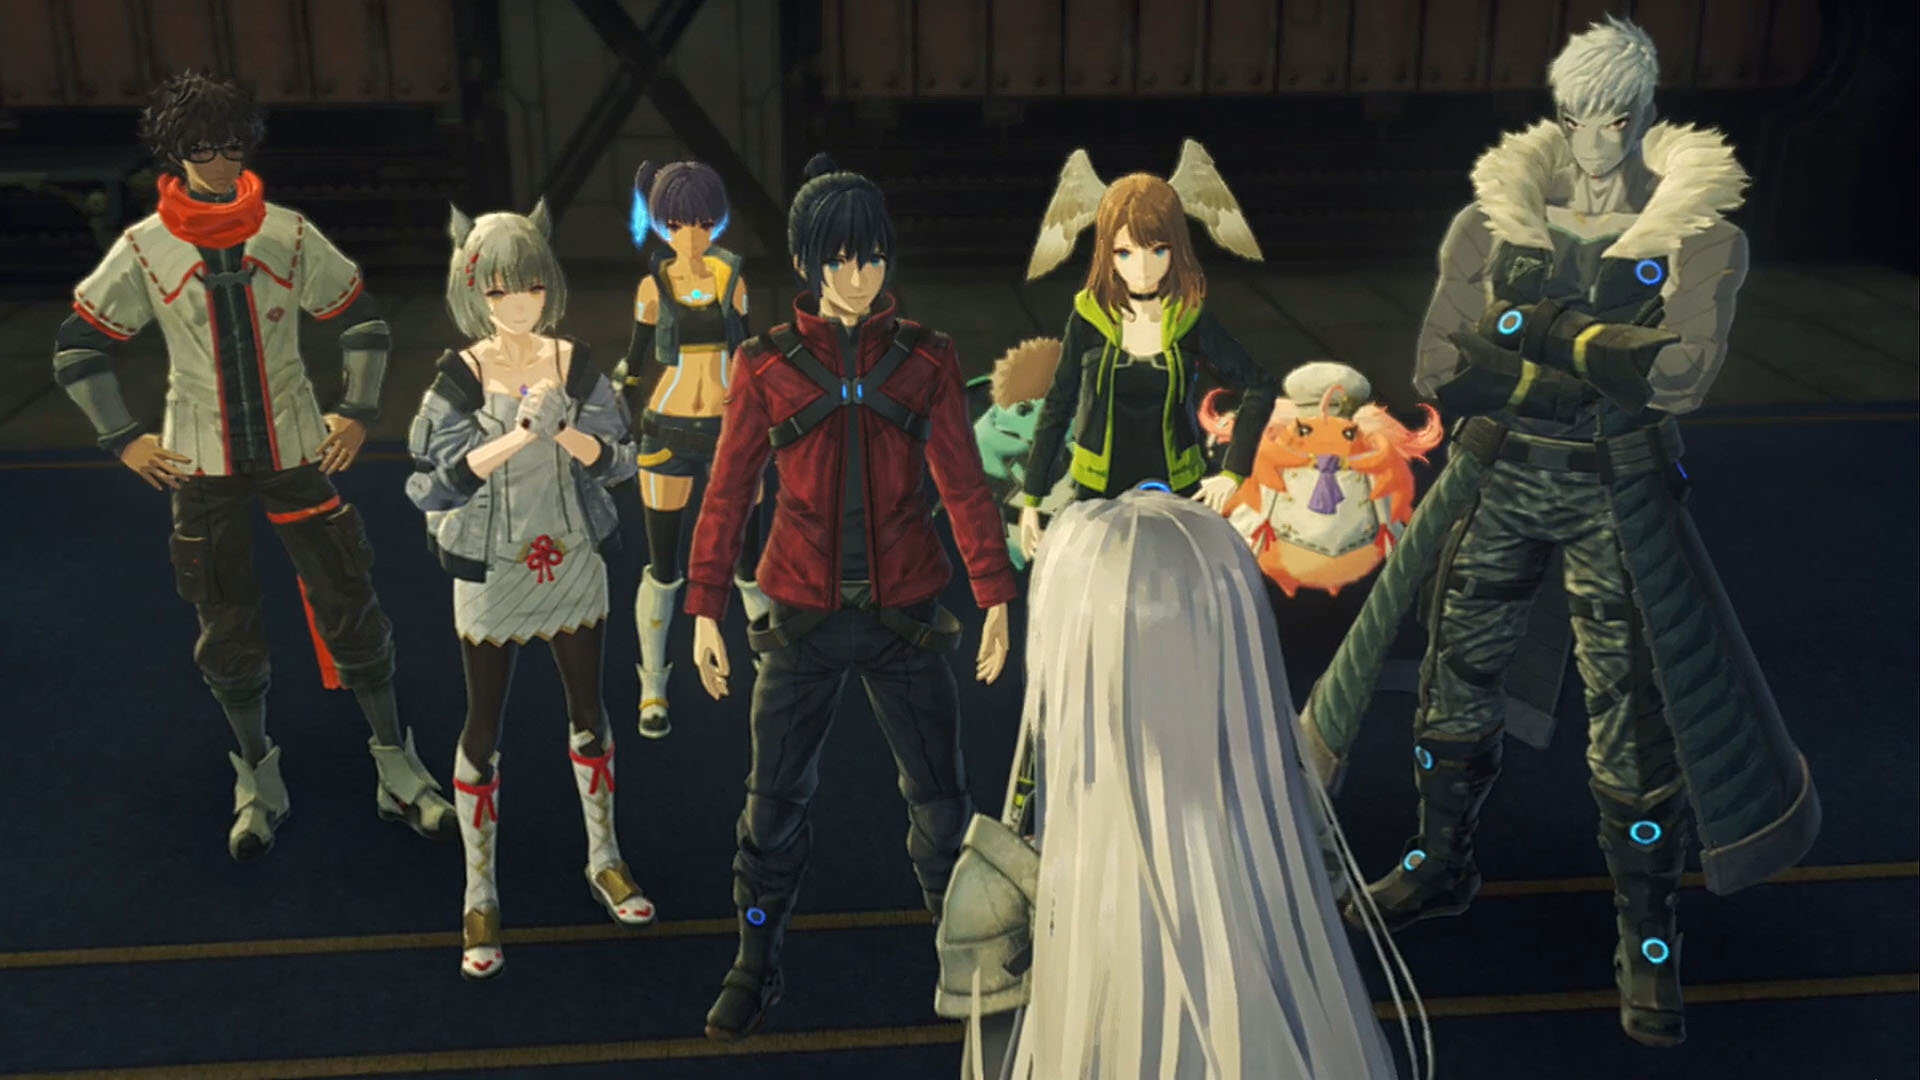 Xenoblade Chronicles 3 all main characters standing together